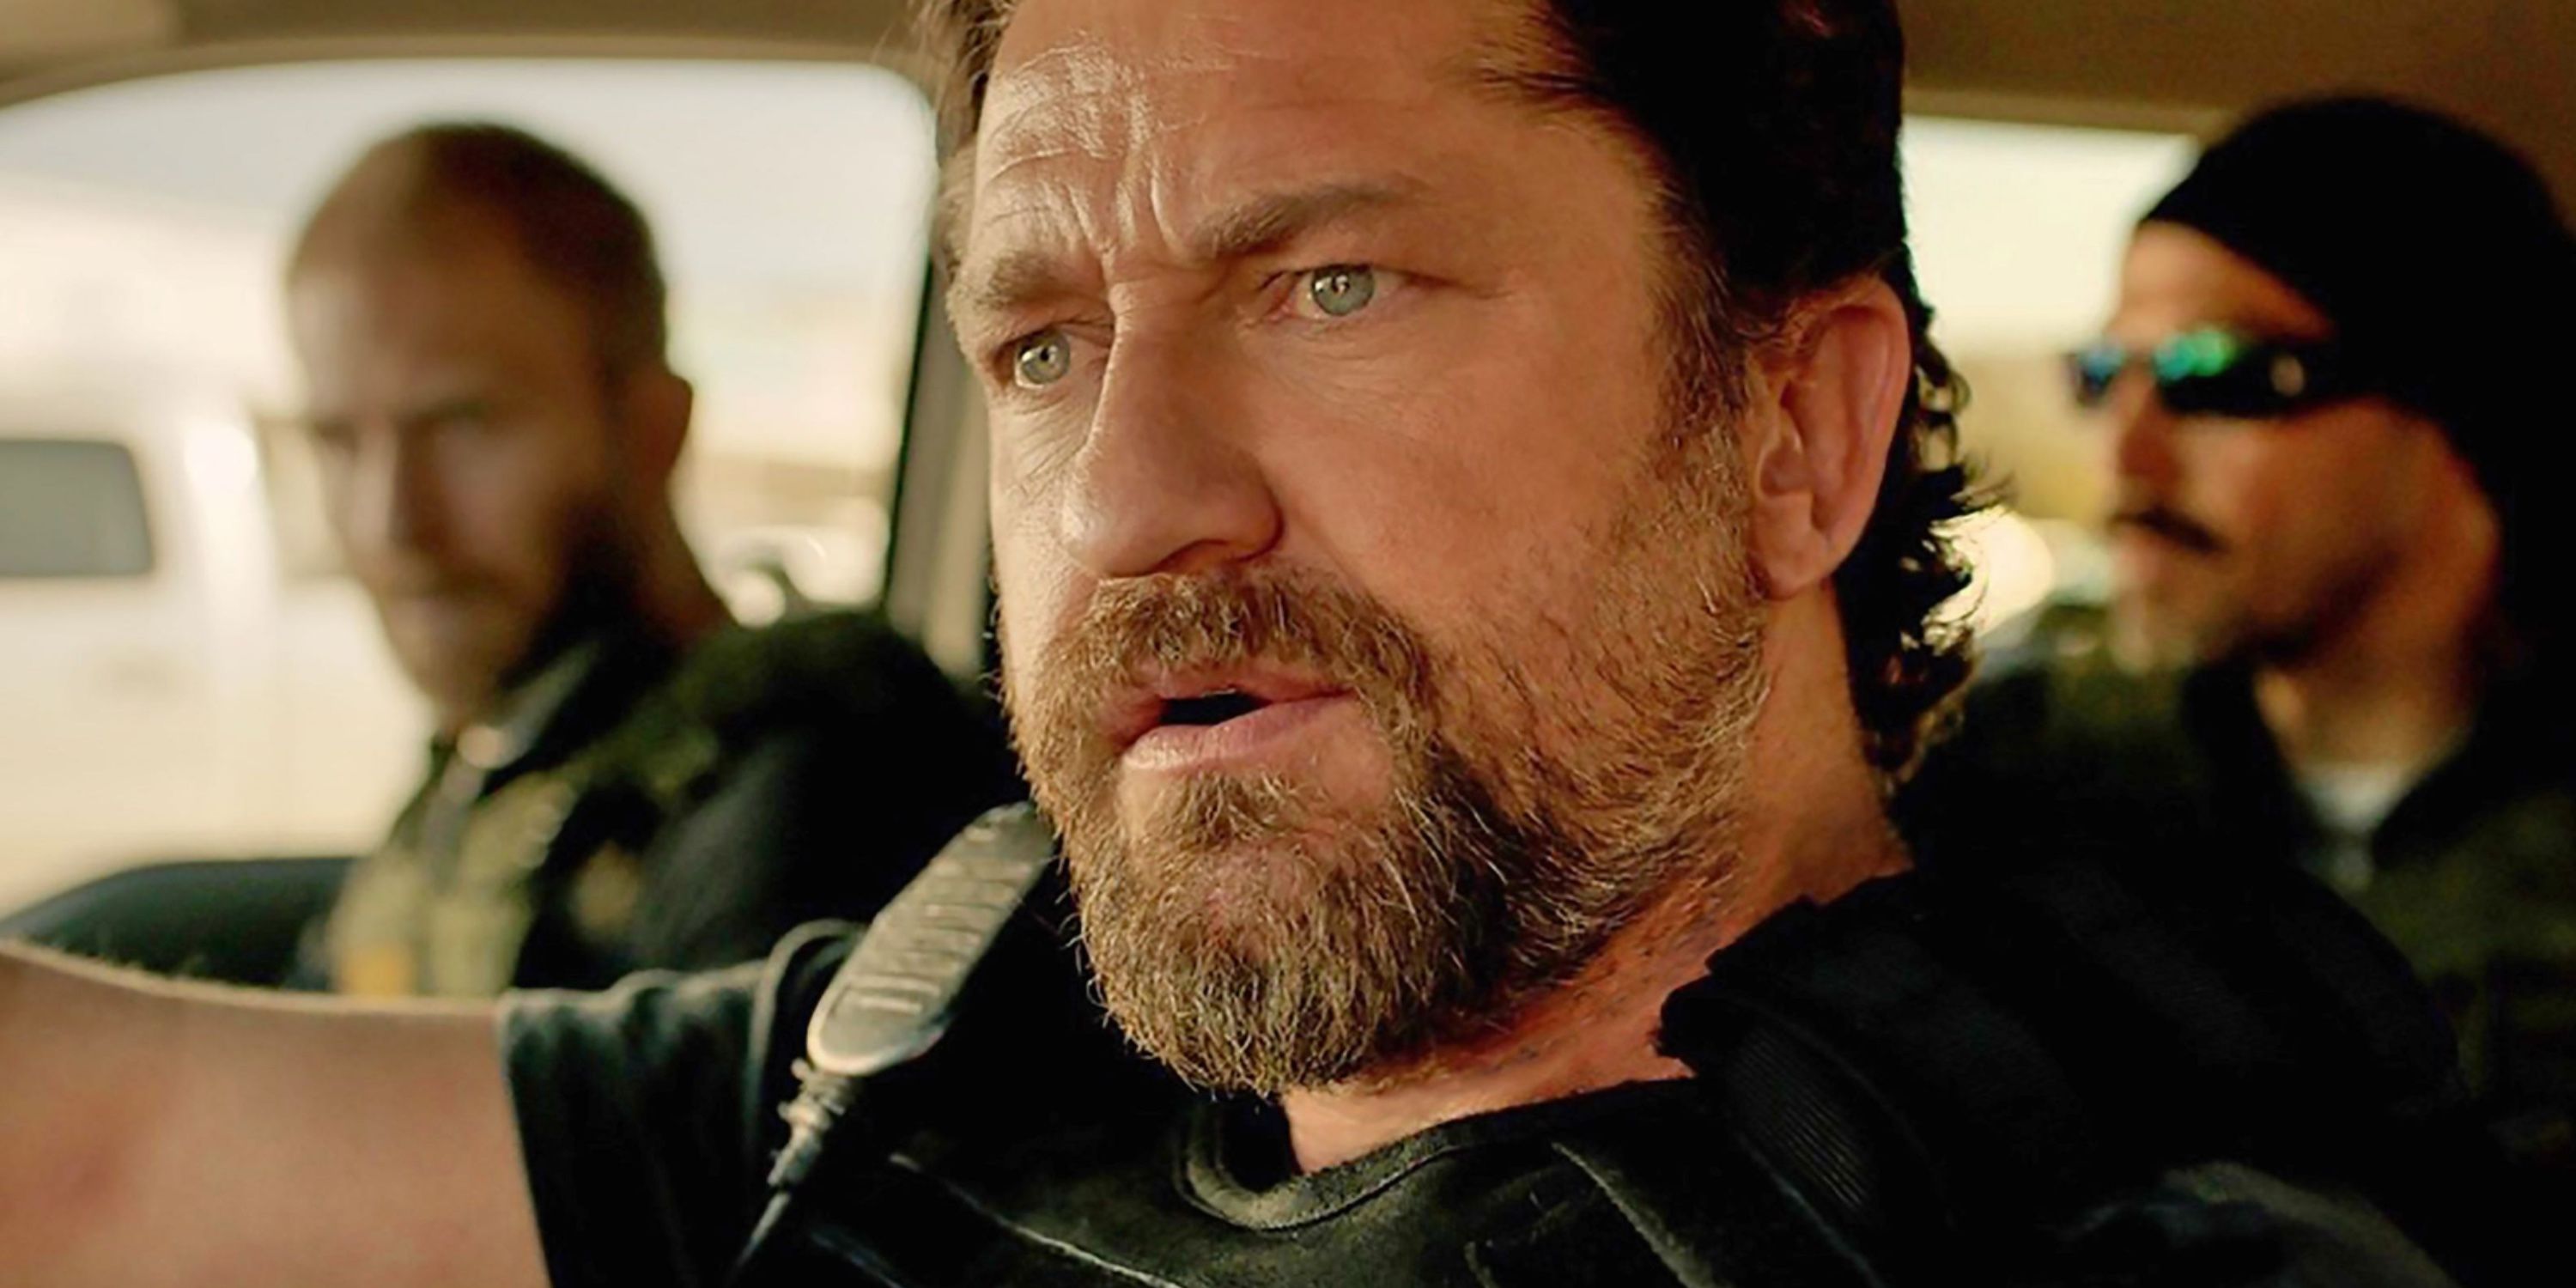 Den of Thieves 2 Starts Filming in Early 2022, According to Gerard Butler